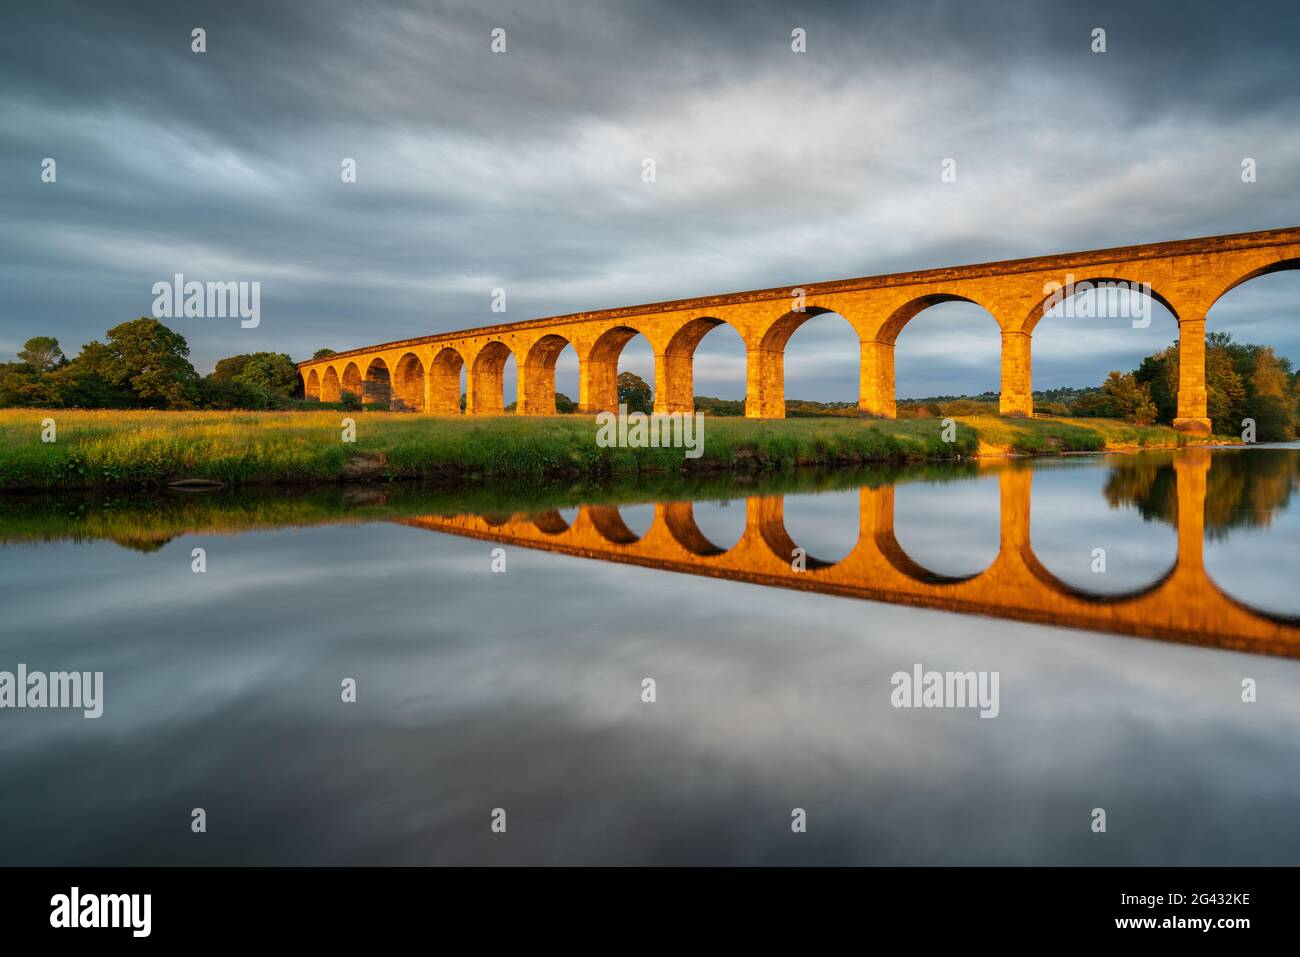 A burst of late evening sunlight turns the arches of Arthington Viaduct golden on a warm summer evening with perfect reflections in the River Wharfe. Stock Photo